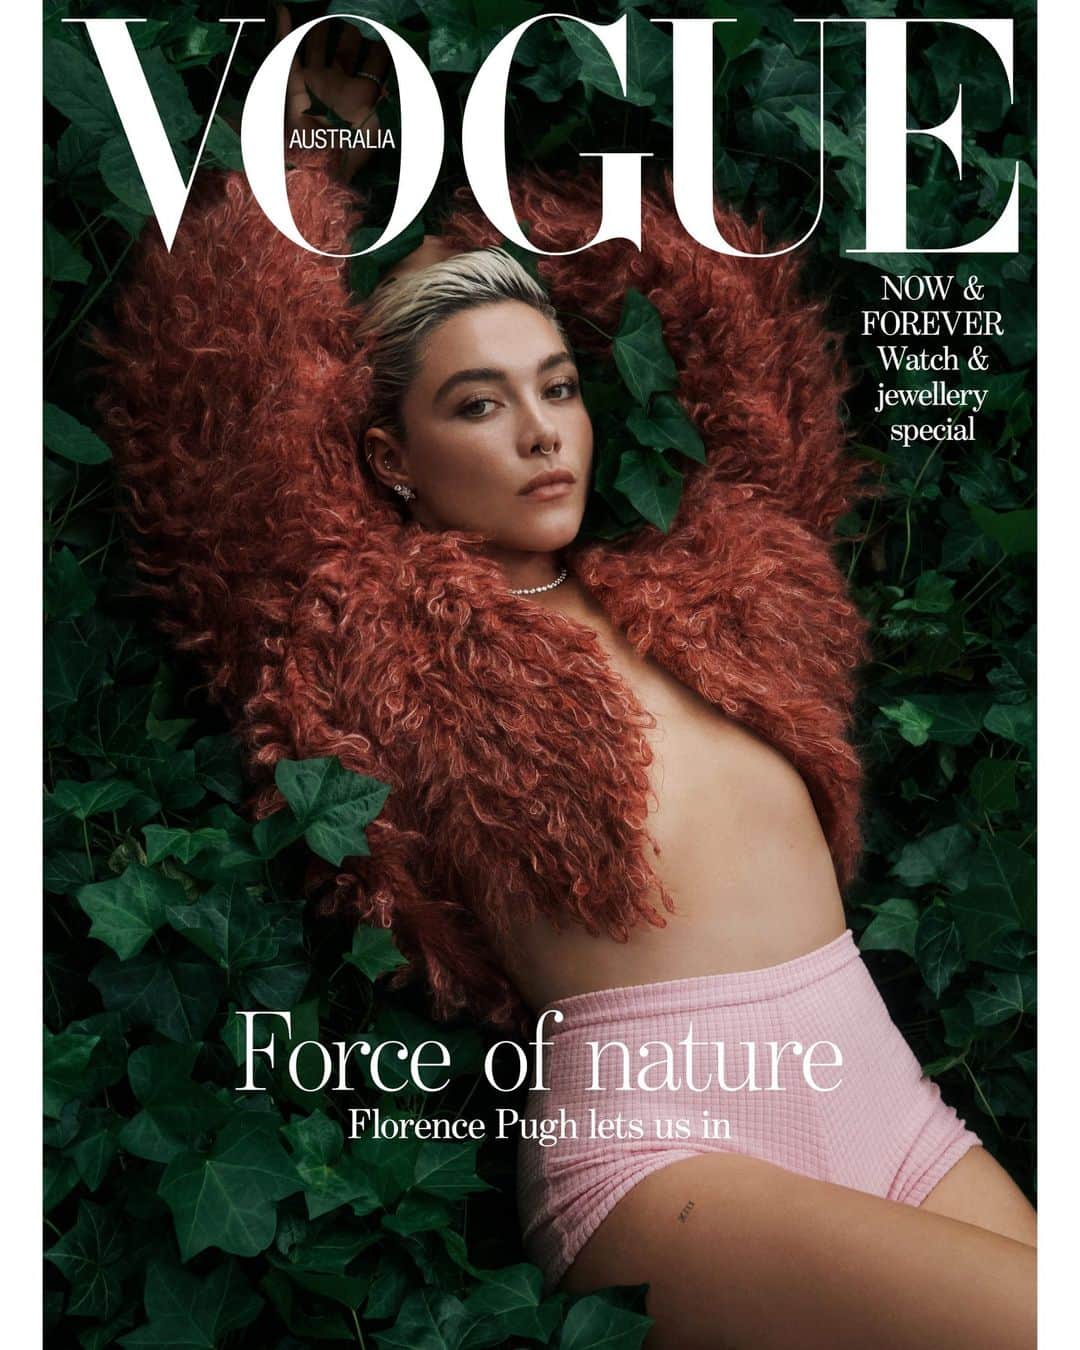 Vogue Australiaのインスタグラム：「#FlorencePugh is our November cover star! Only 27 and already hailed as a once-in-a-generation acting talent, for our November cover story, Pugh caught up with @hannahroserose over pottery and pastries to discuss radical self-reflection and what’s next. Read the full story in the link in bio, or pick up your own issue of Vogue's November issue, on stands Monday, November 6.  Styling by @ChristineCentenera, photography by @LachlanBailey, story by @HannahRoseRose, makeup by @Lauren.Parsons, hair by @PeterLuxHair, nails by @NailedbySG, ep & talent direction by @Rikki_Keene production by @RoscoProduction, @CharlotteMelissaRose.   Florence wears @loewe, @triangl, and @tiffanyandco.」